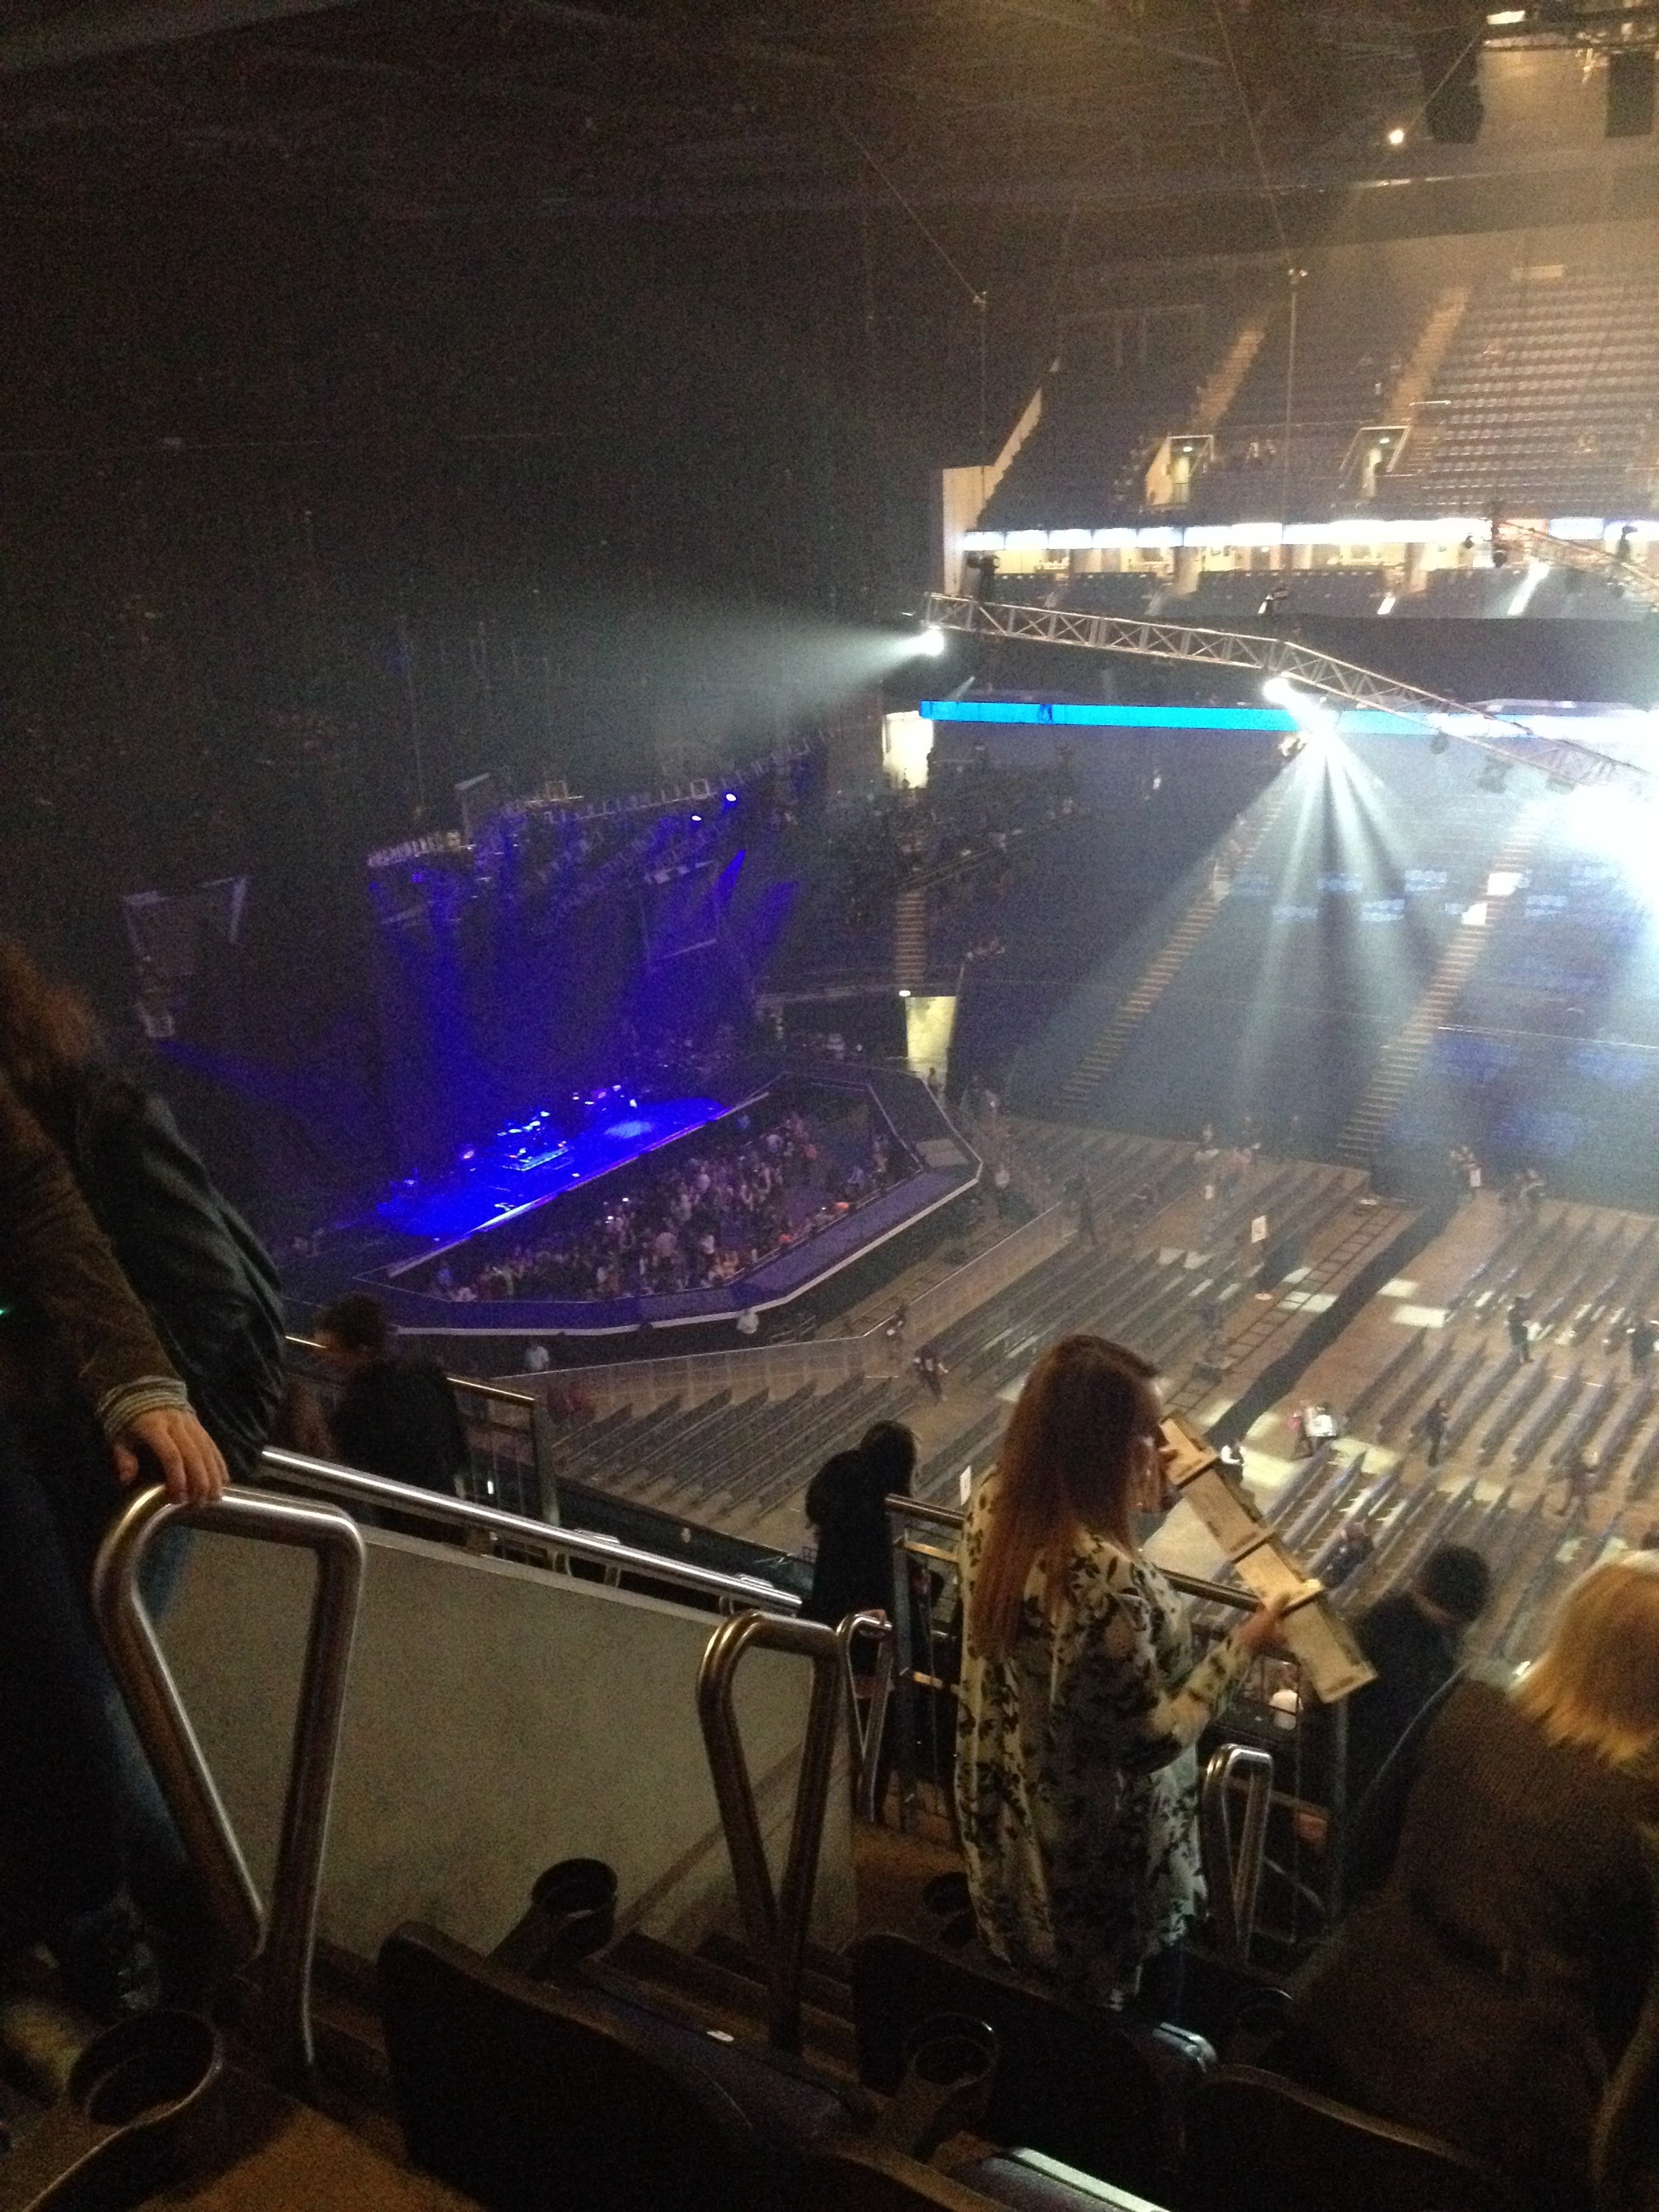 View from O2 Arena (London) Block 404 Row H2448 x 3264